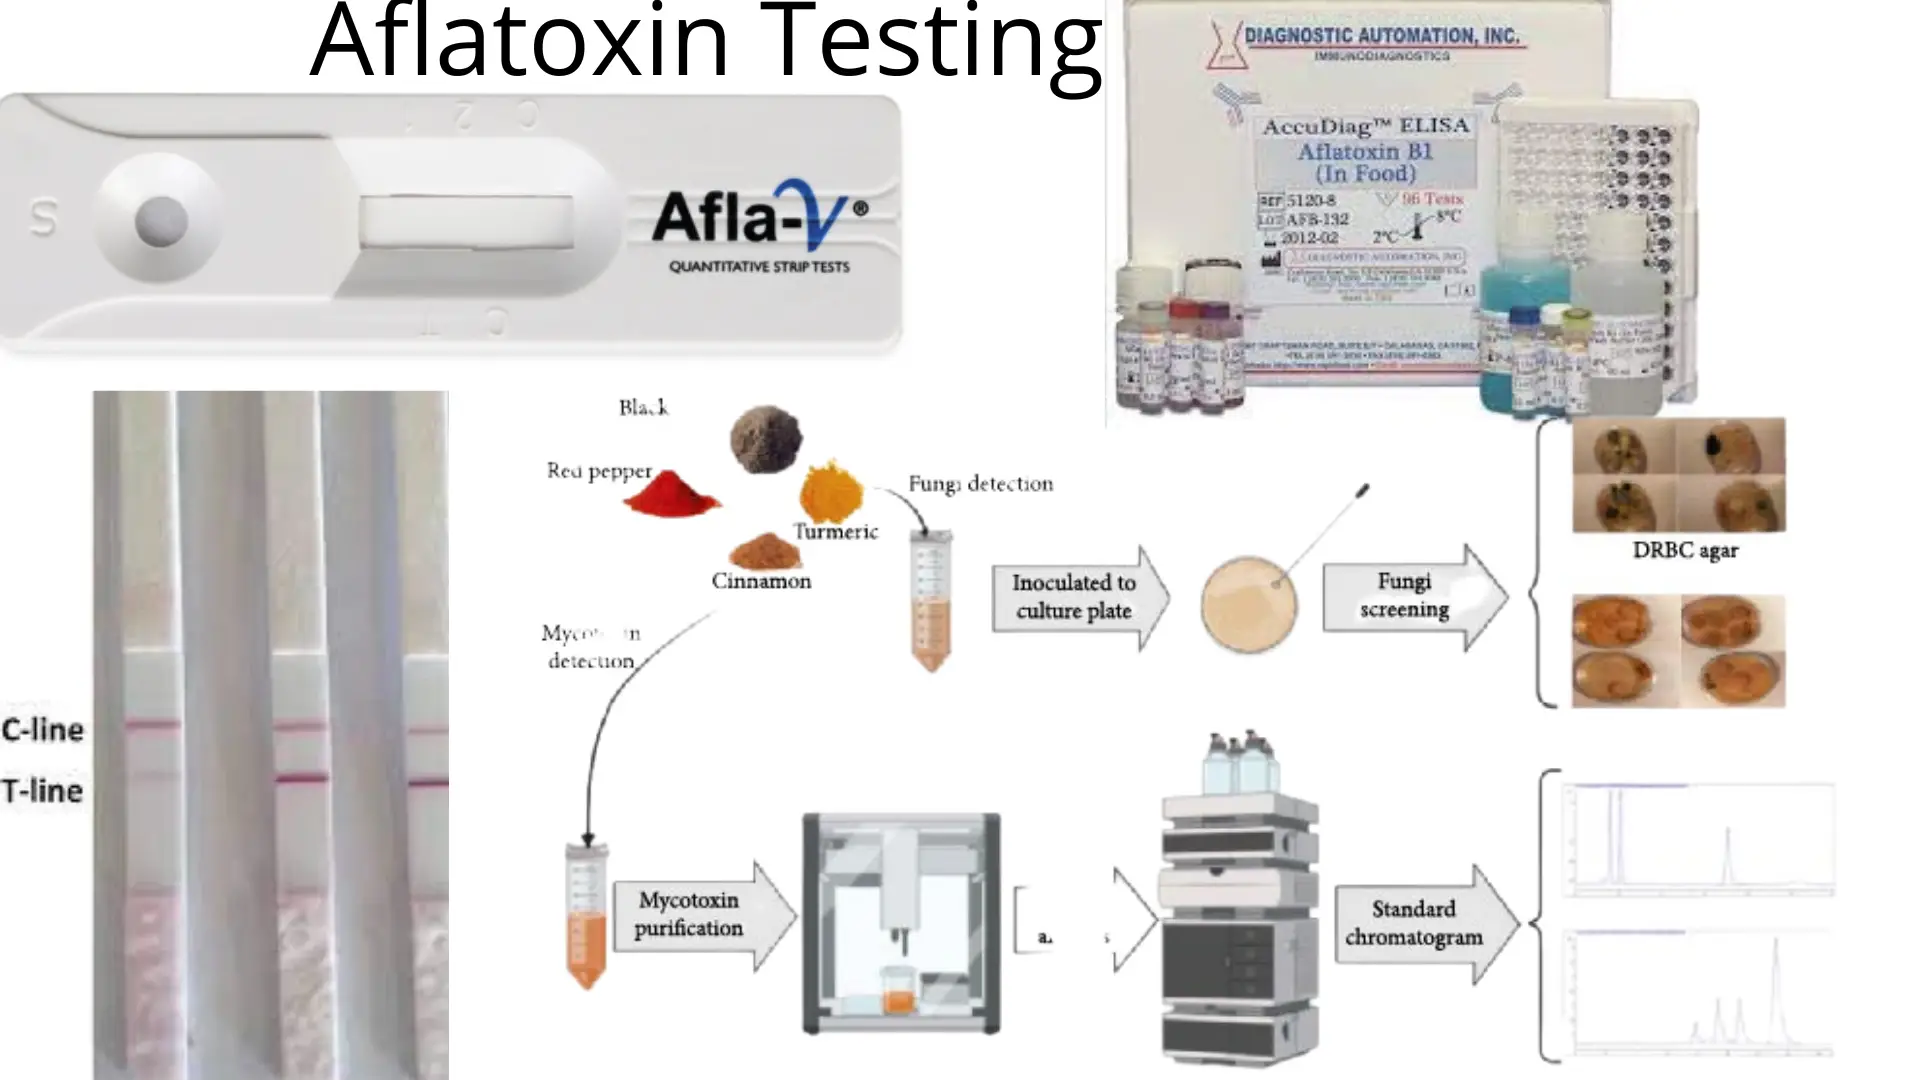 Aflatoxin Testing: Materials and Methods